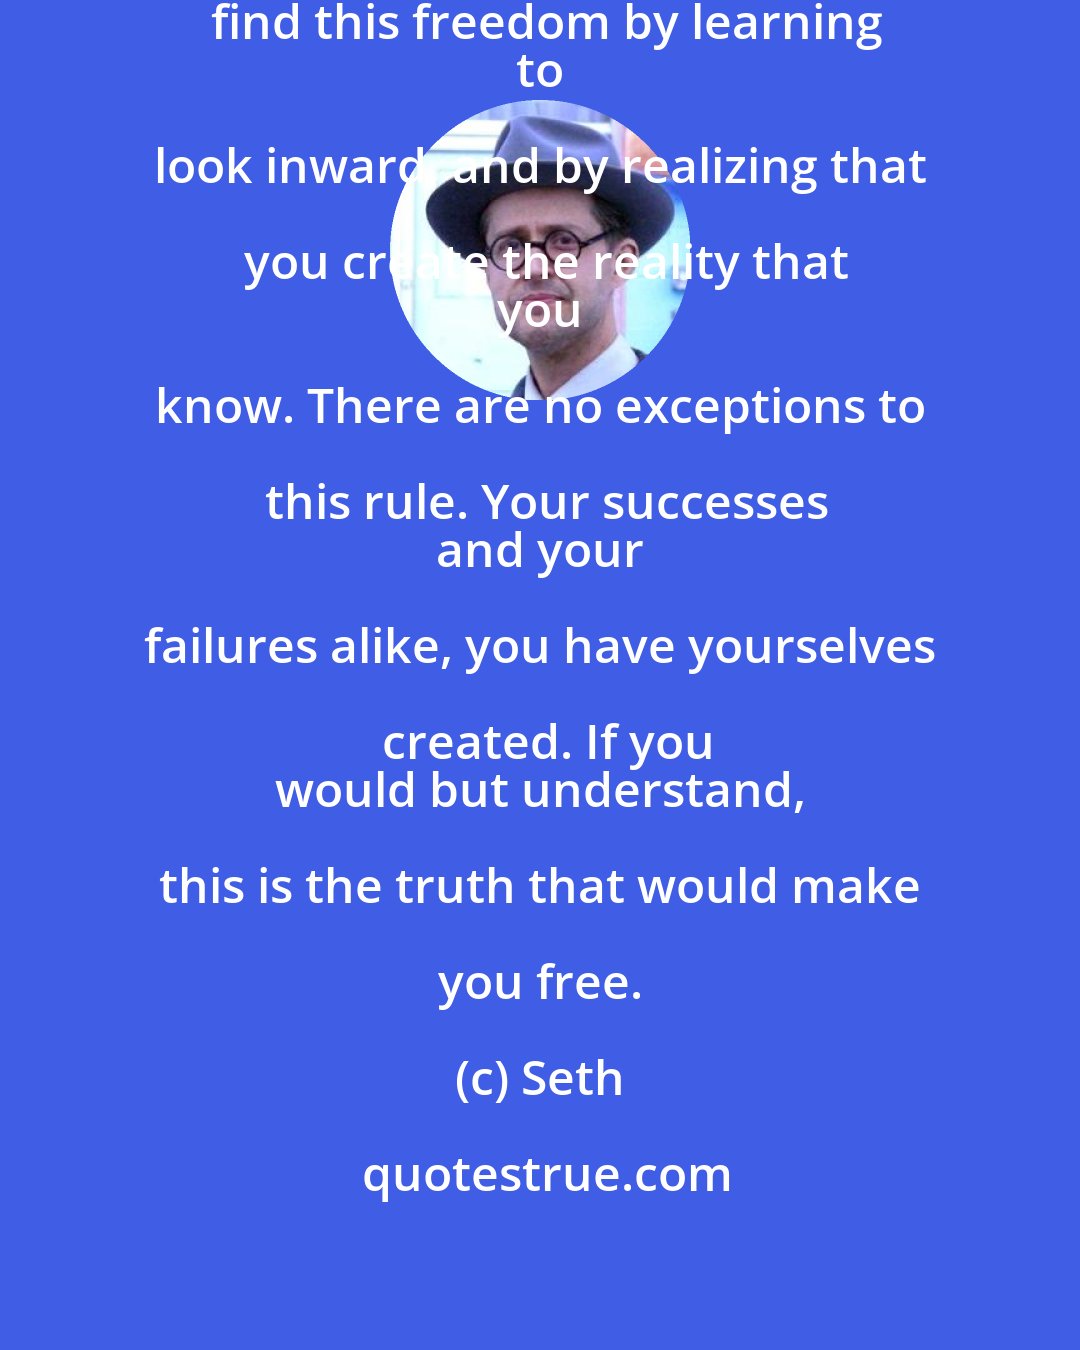 Seth: You create your reality. You will find this freedom by learning
 to look inward, and by realizing that you create the reality that
 you know. There are no exceptions to this rule. Your successes
 and your failures alike, you have yourselves created. If you
 would but understand, this is the truth that would make you free.